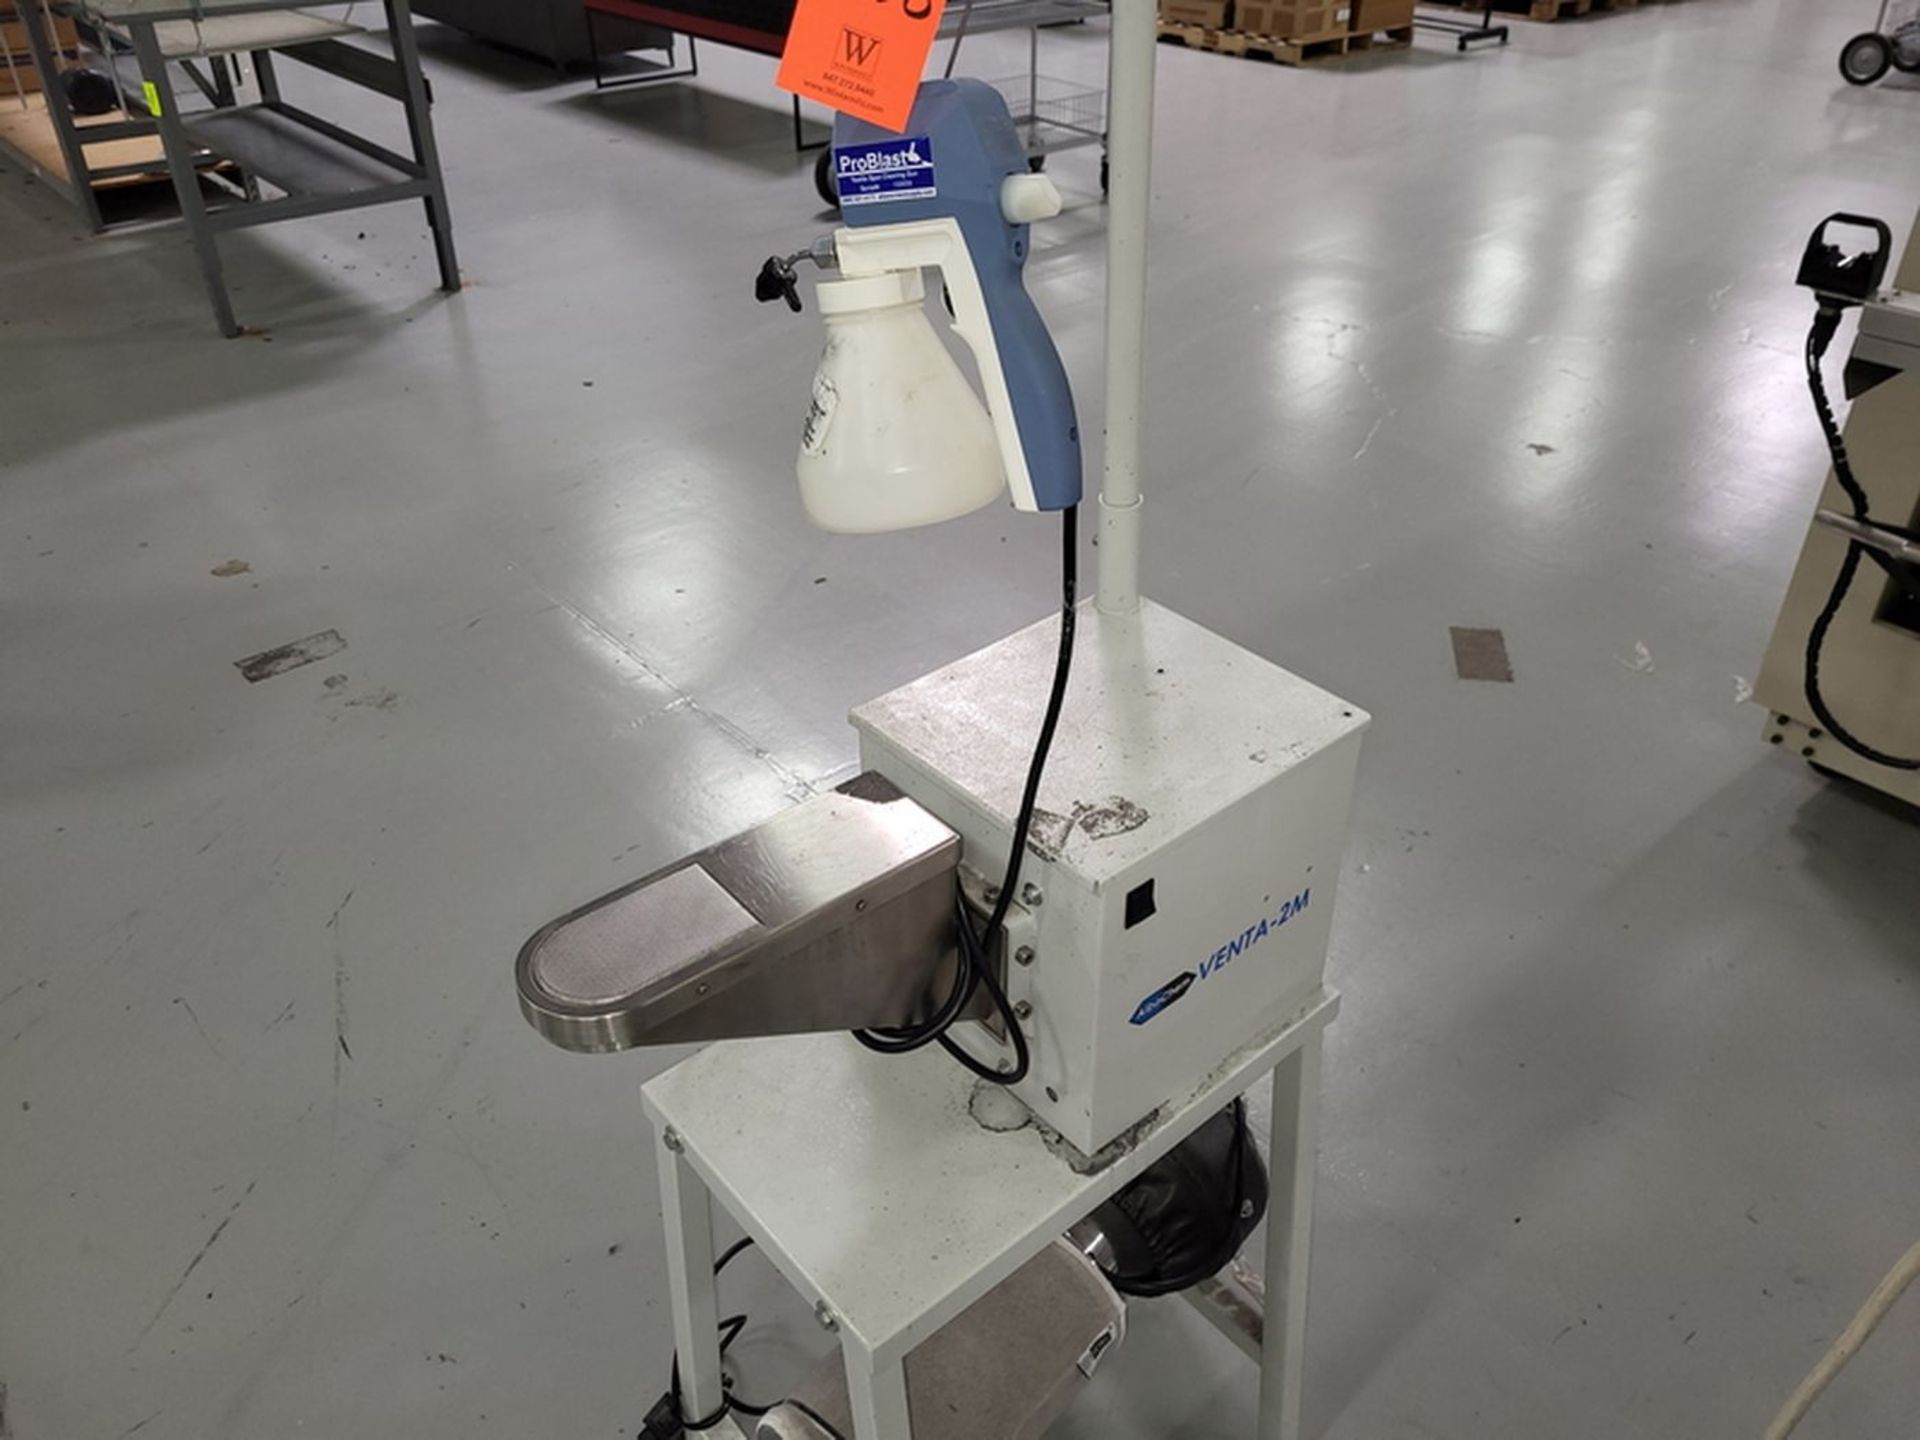 Rotondi Model Venta-2M Spot Cleaning Station, S/N: 21 M 67323; with ProBlast Textile Spot Cleaning